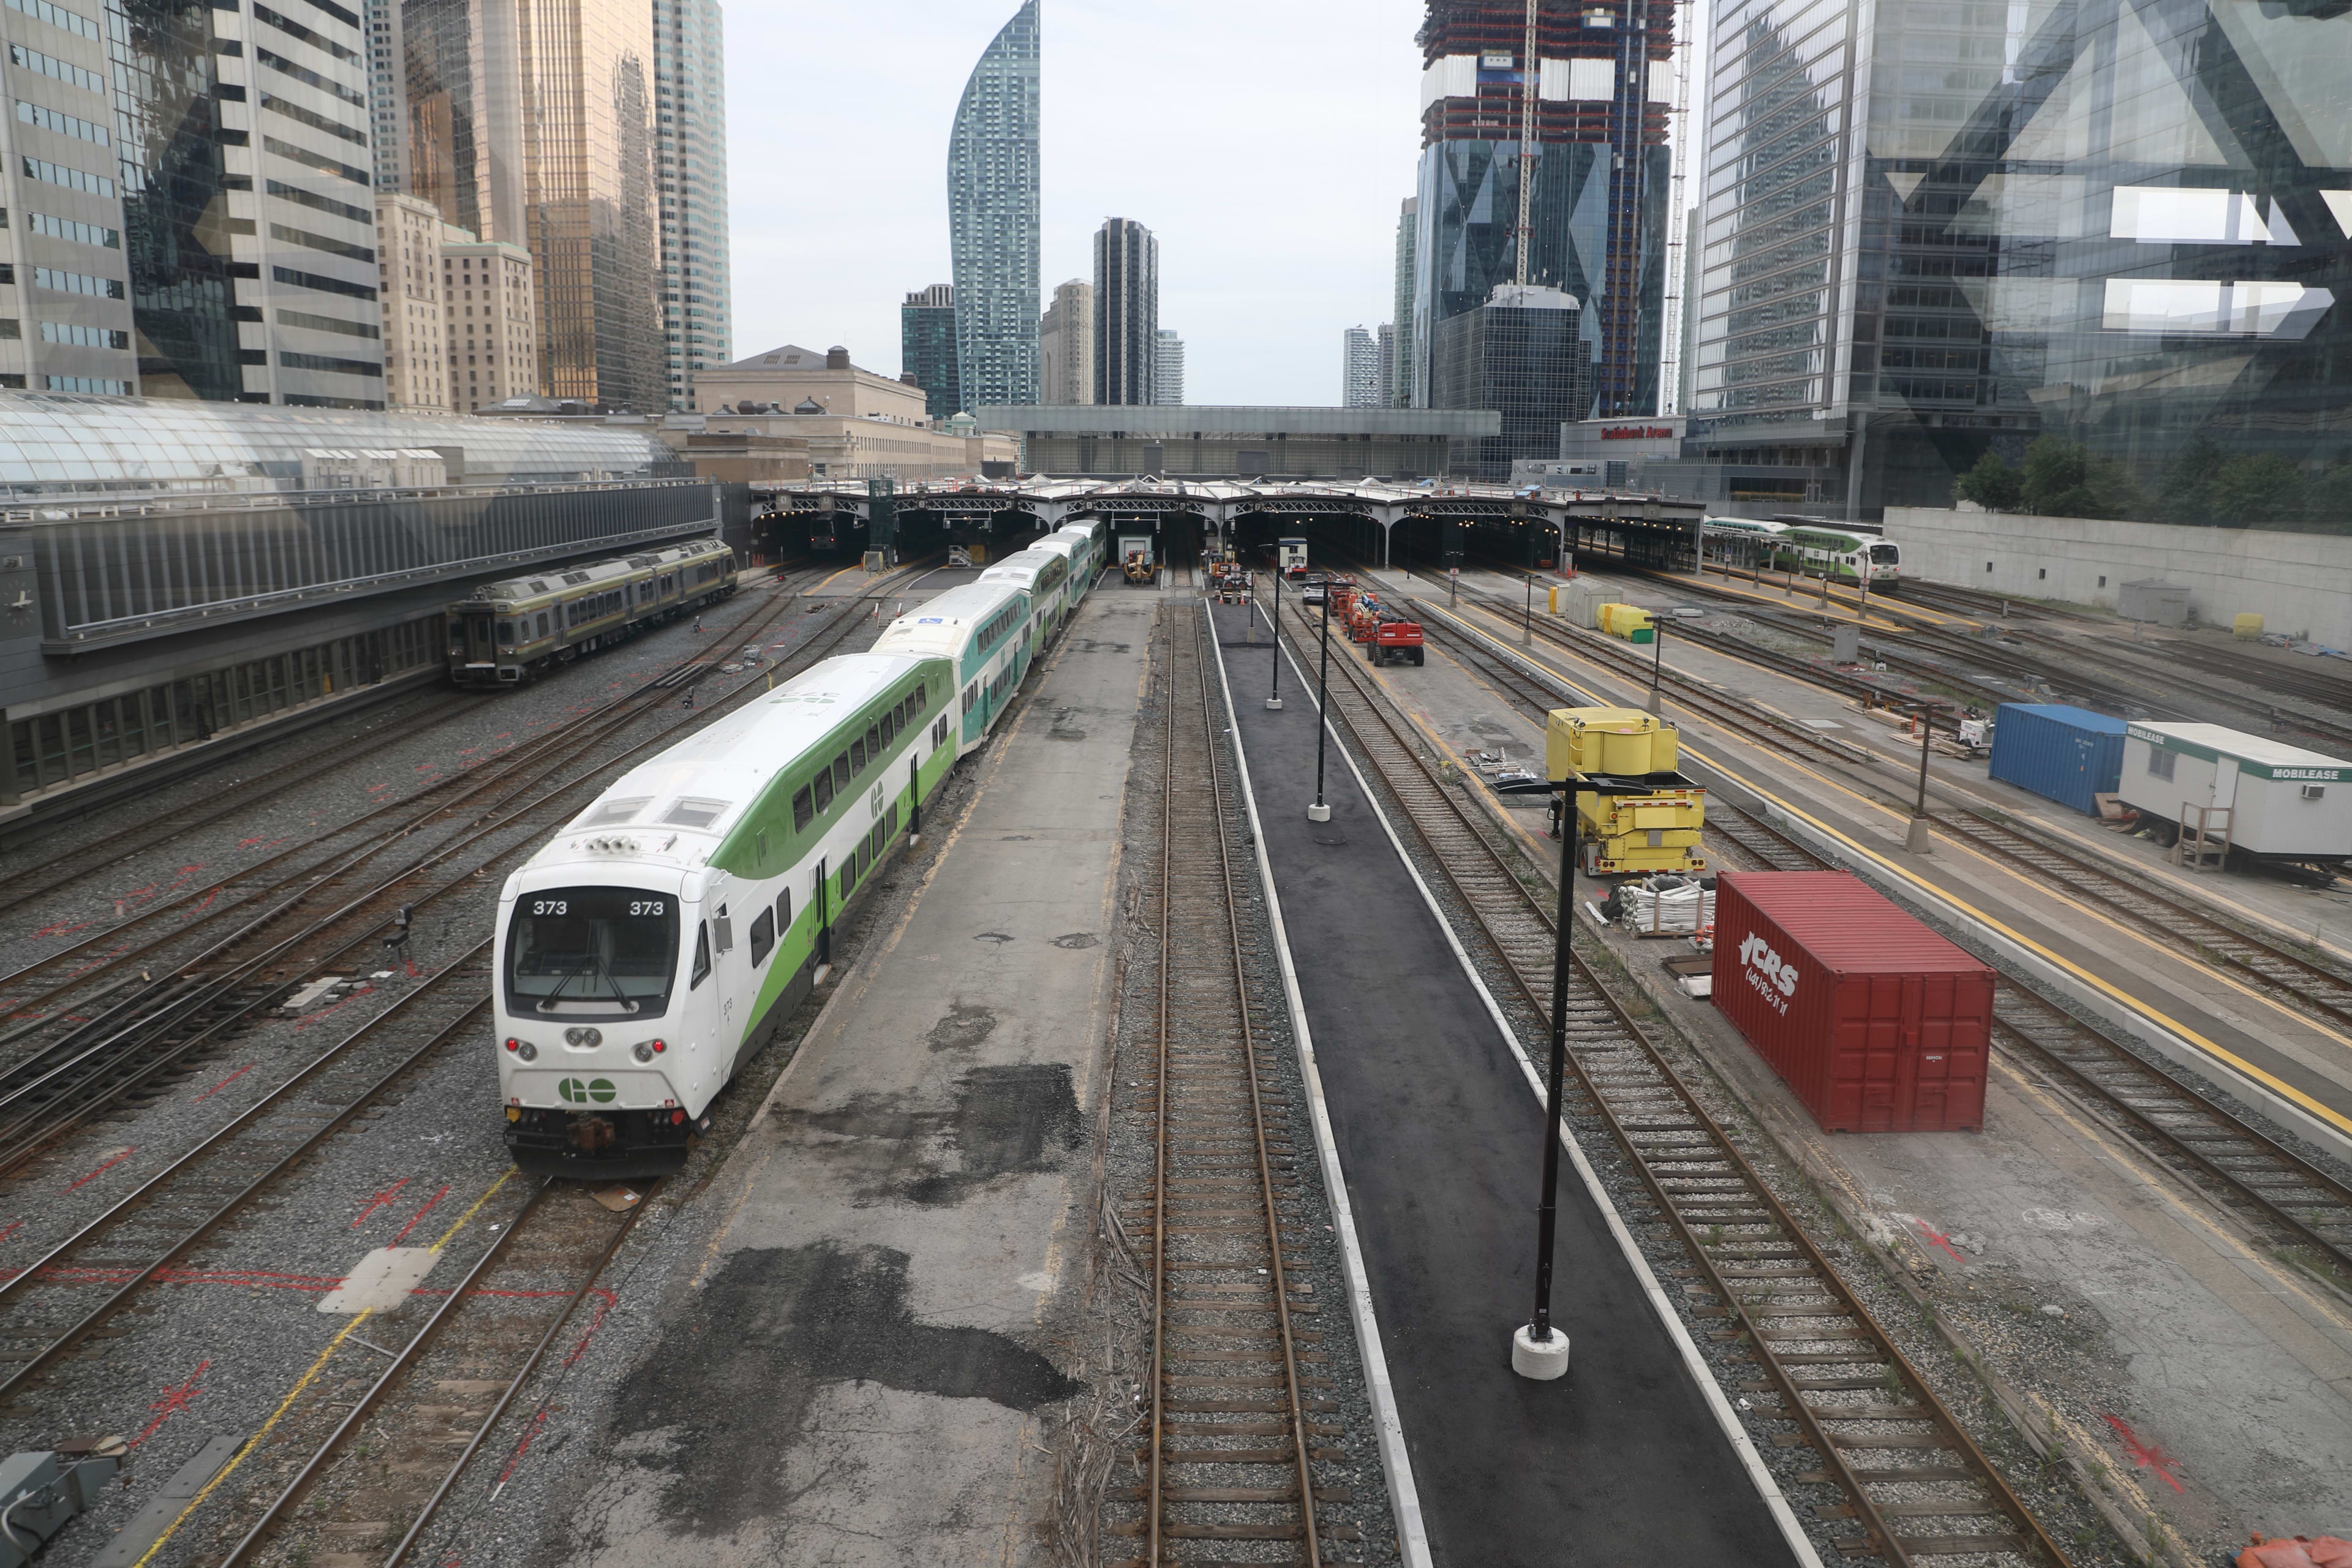 A concrete extension is shown jutting out from a Union Station platform, as a GO train arrives.